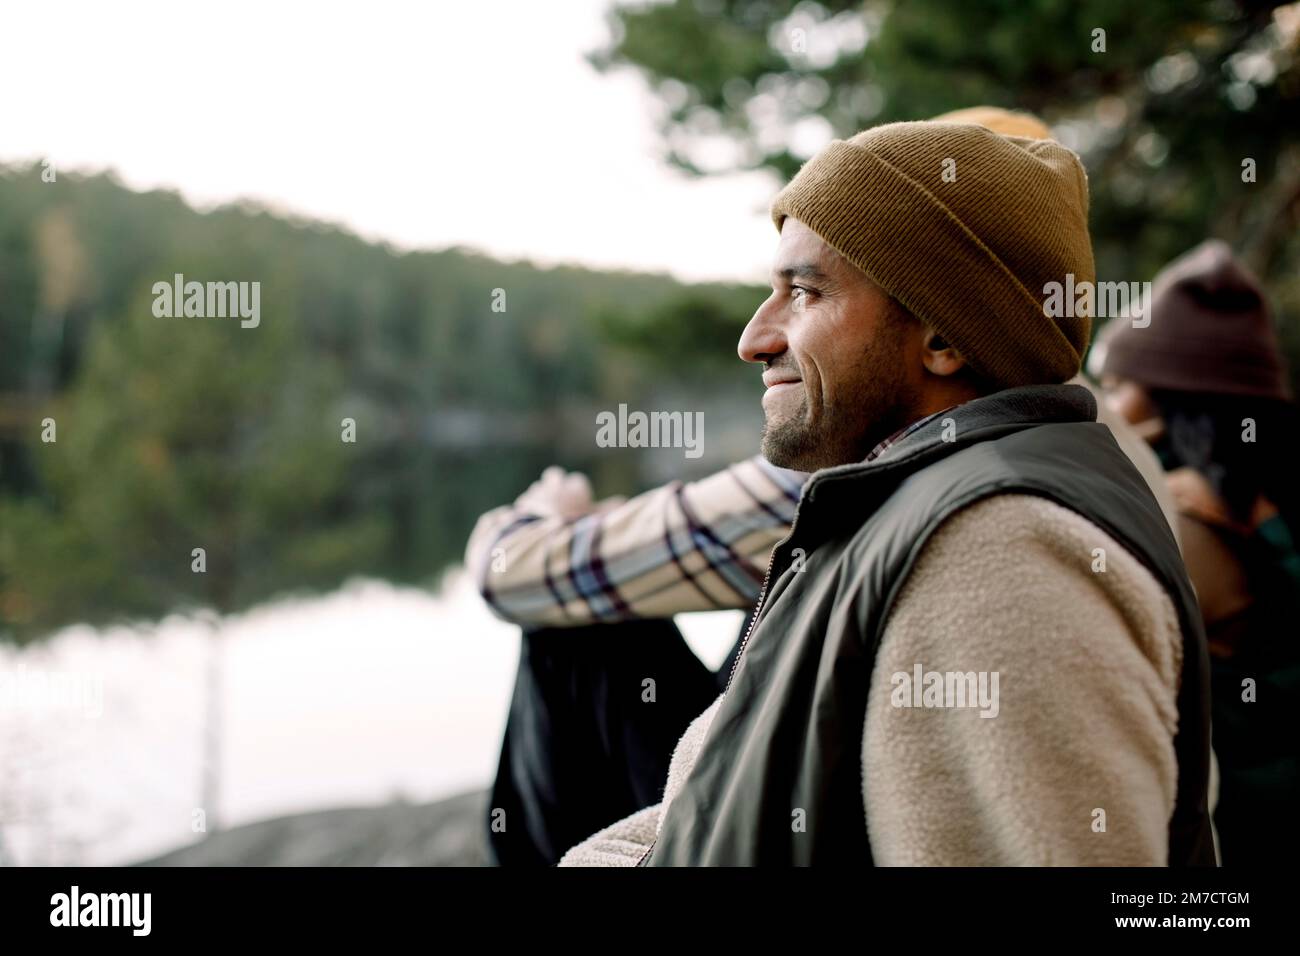 Side view of smiling man wearing knit hat by friends Stock Photo